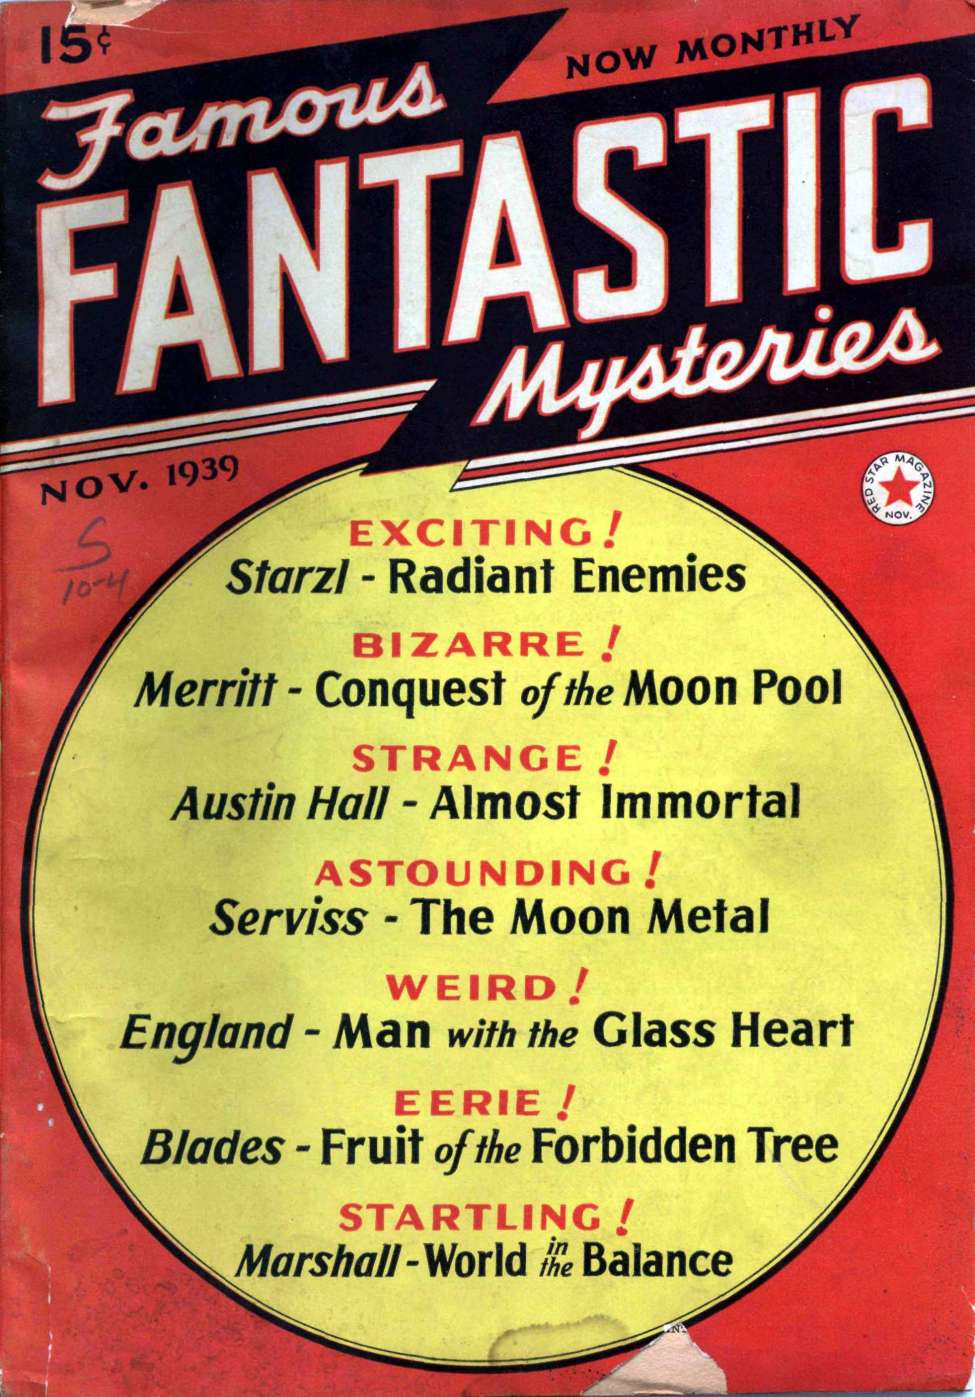 Book Cover For Famous Fantastic Mysteries v1 2 - The Radiant Enemies - R. F. Starzl